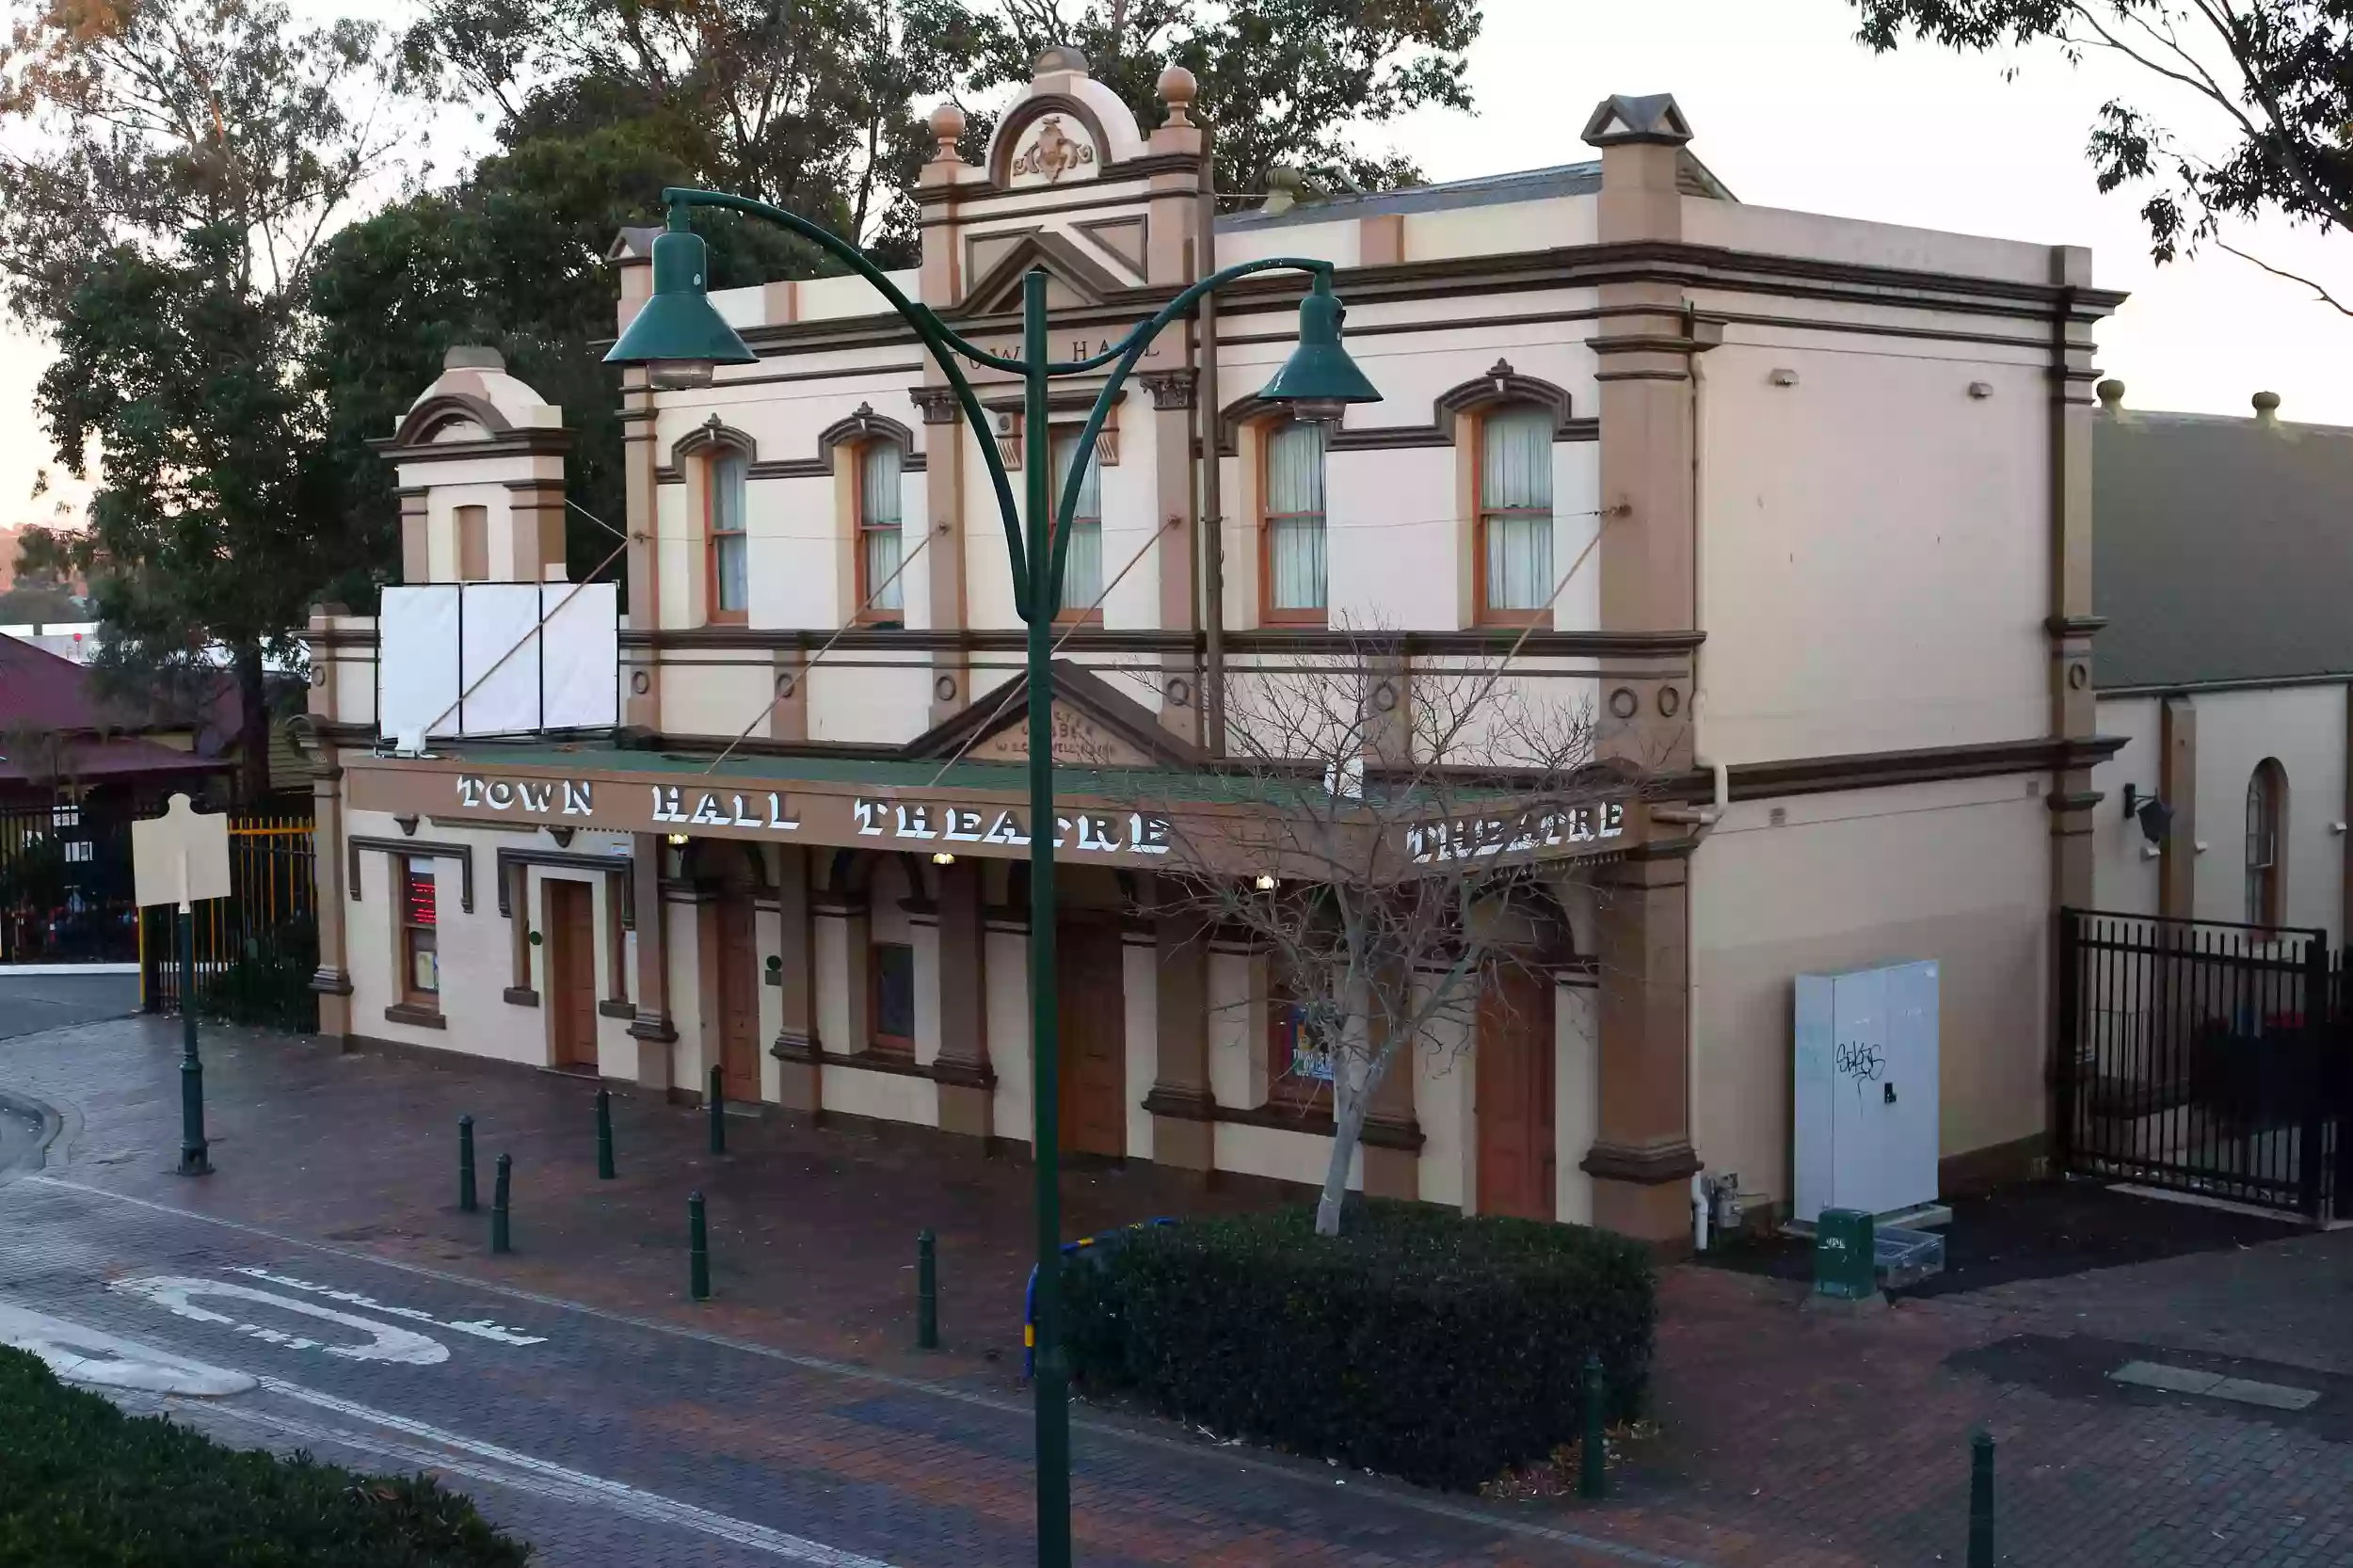 Campbelltown Town Hall Theatre